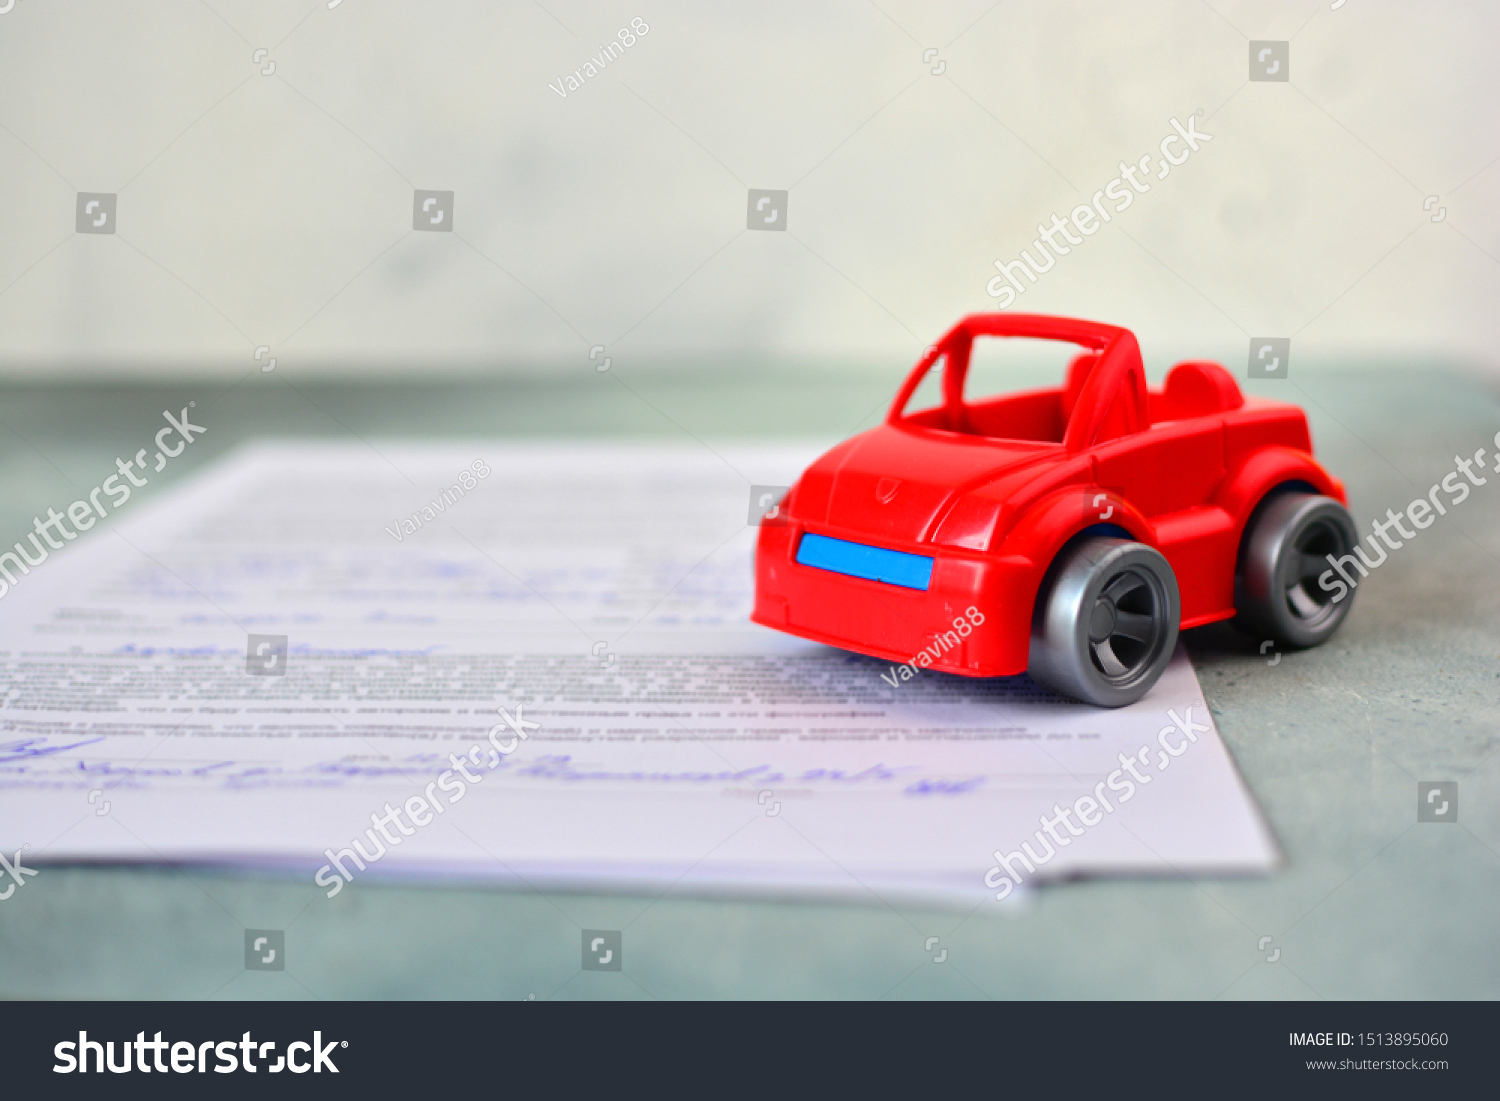 toy car on rent